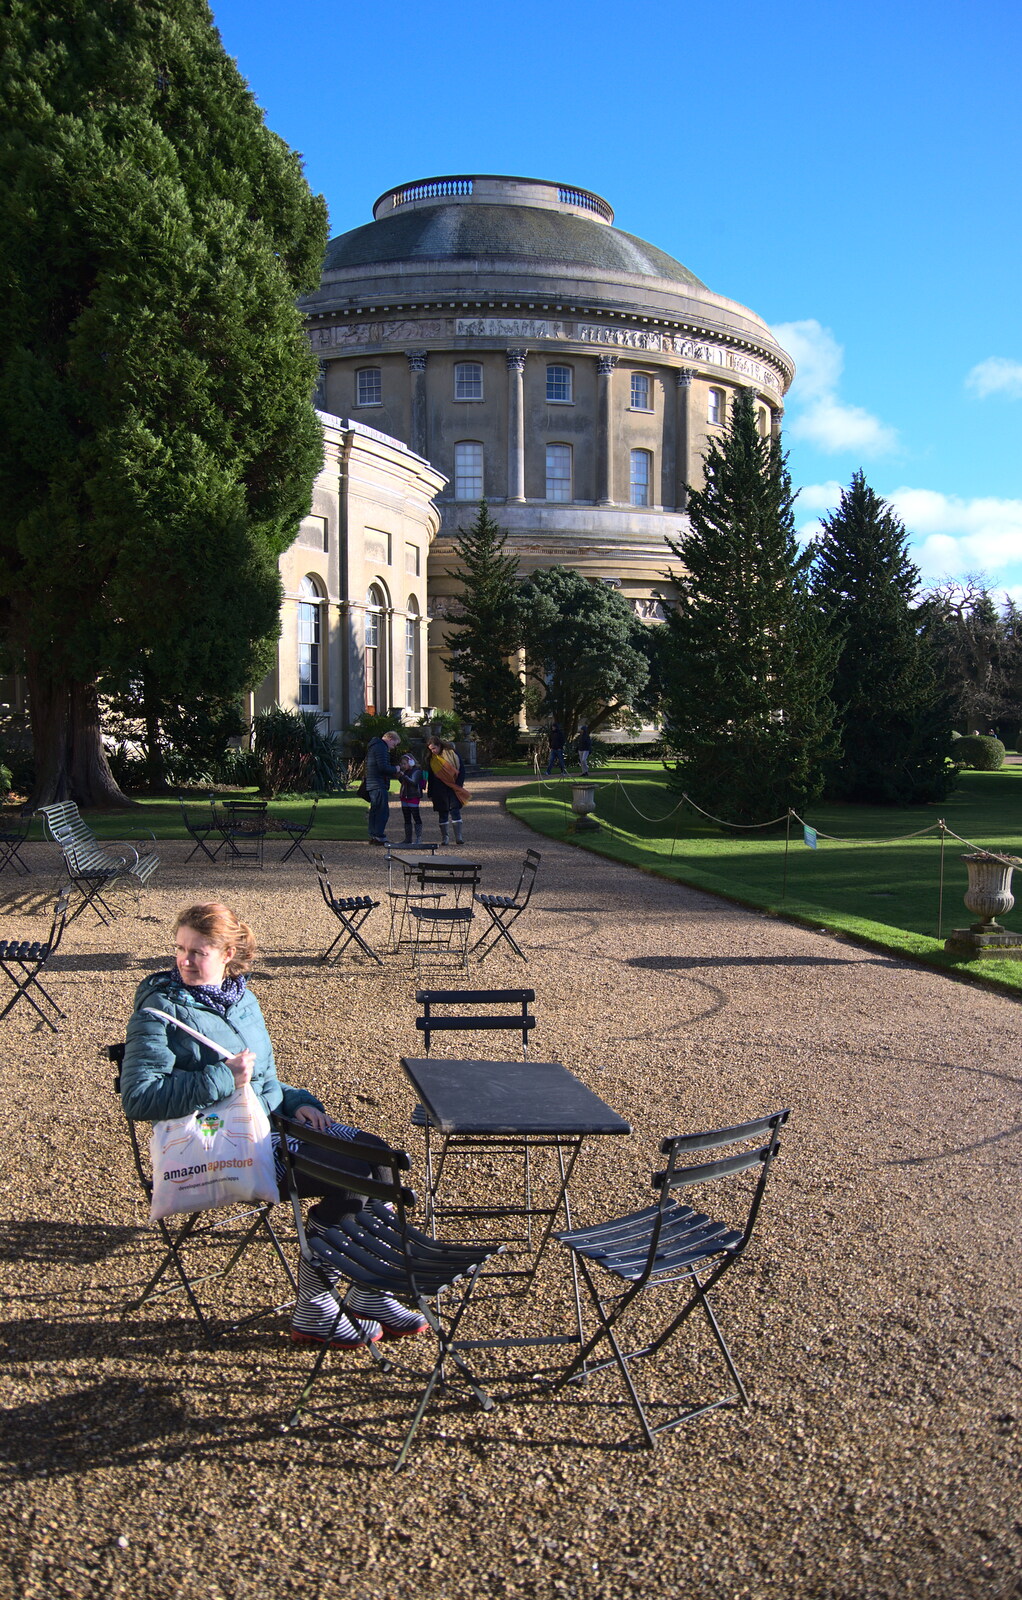 Isobel sits outside the orangery from Life Below Stairs, Ickworth House, Horringer, Suffolk - 28th January 2018